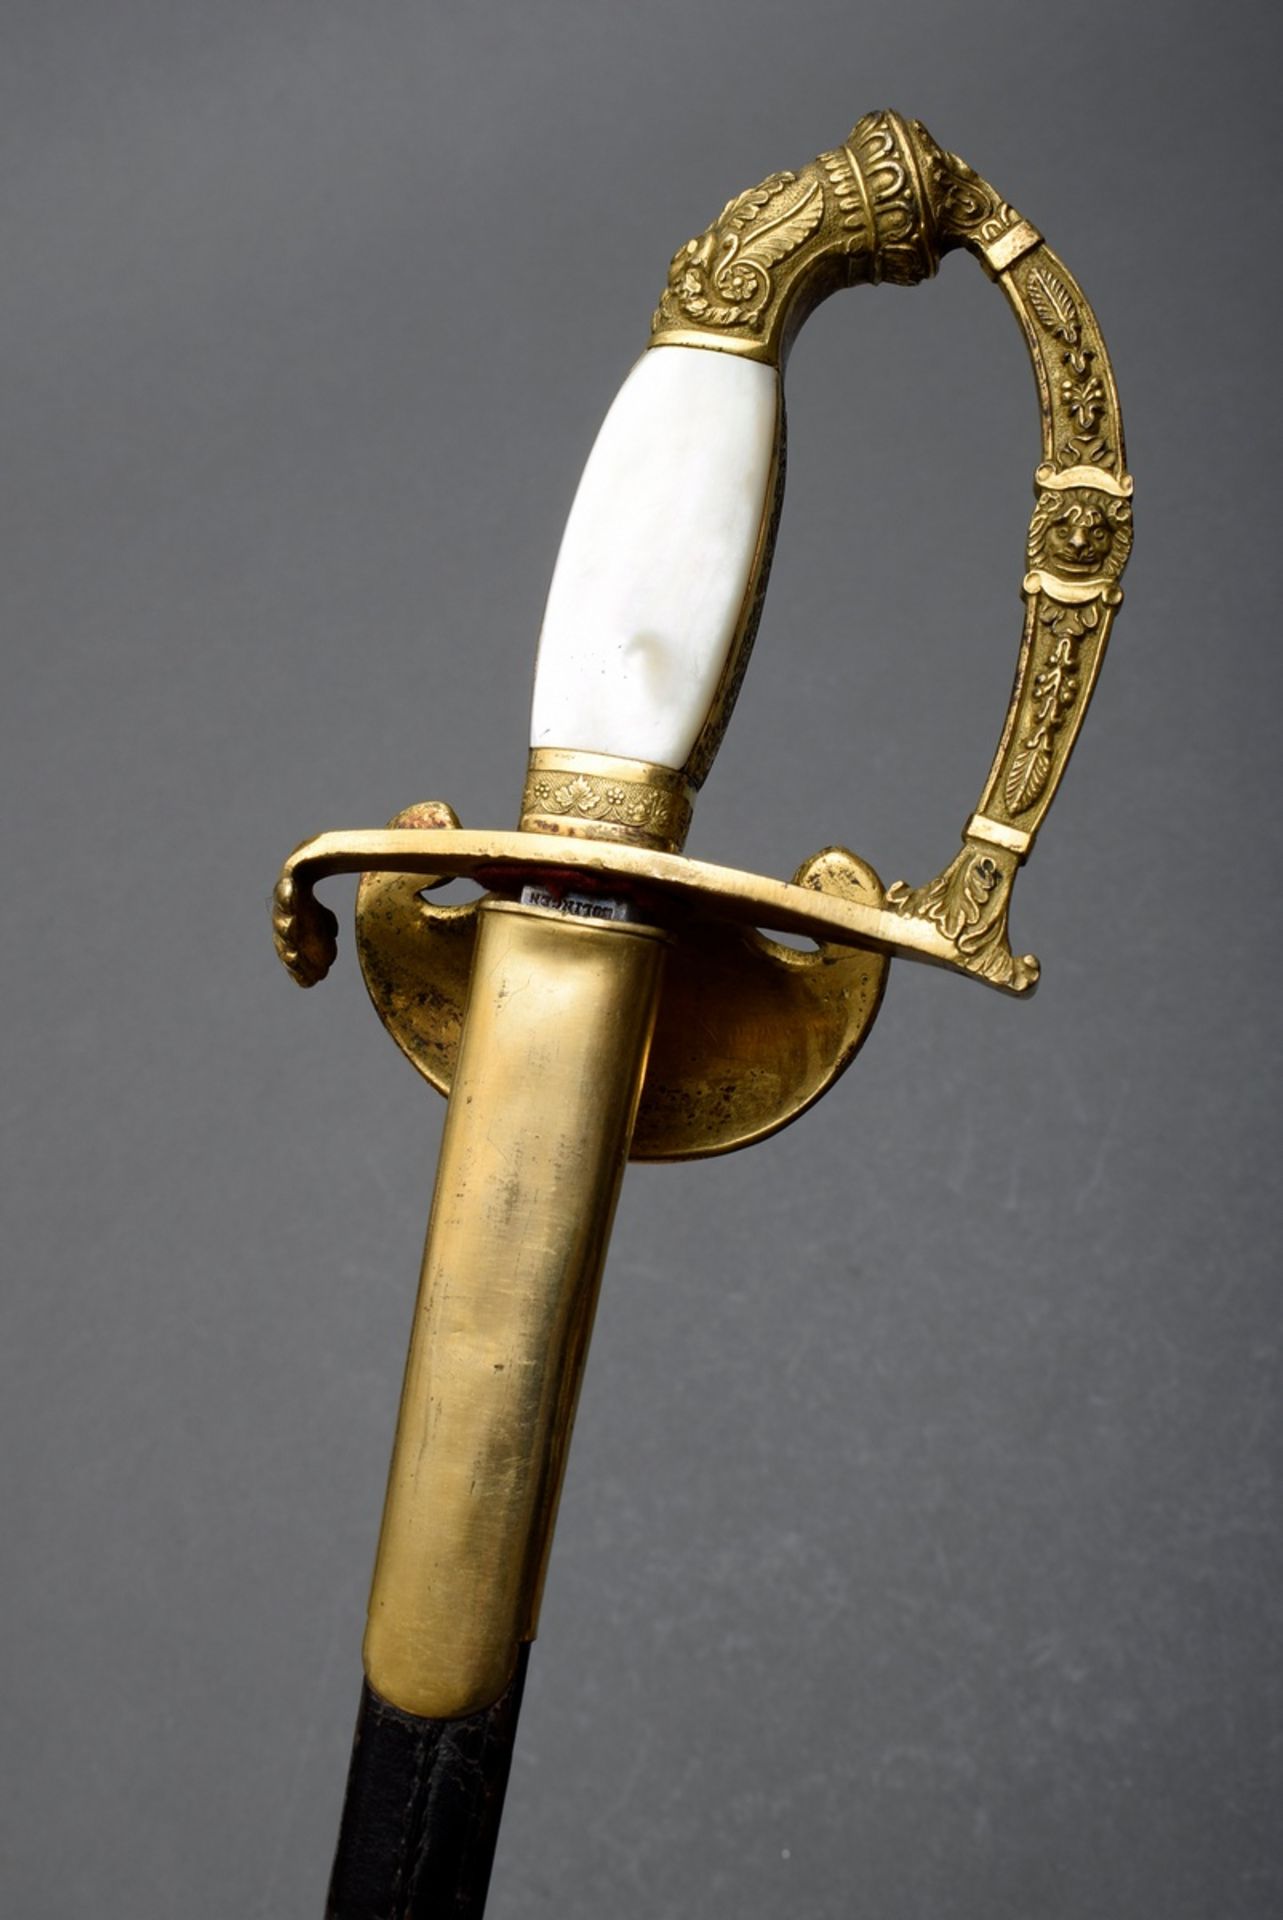 Bavarian civil servant's sword from the reign of King Ludwig I (1825-1848) or King Ludwig II (1864- - Image 3 of 11